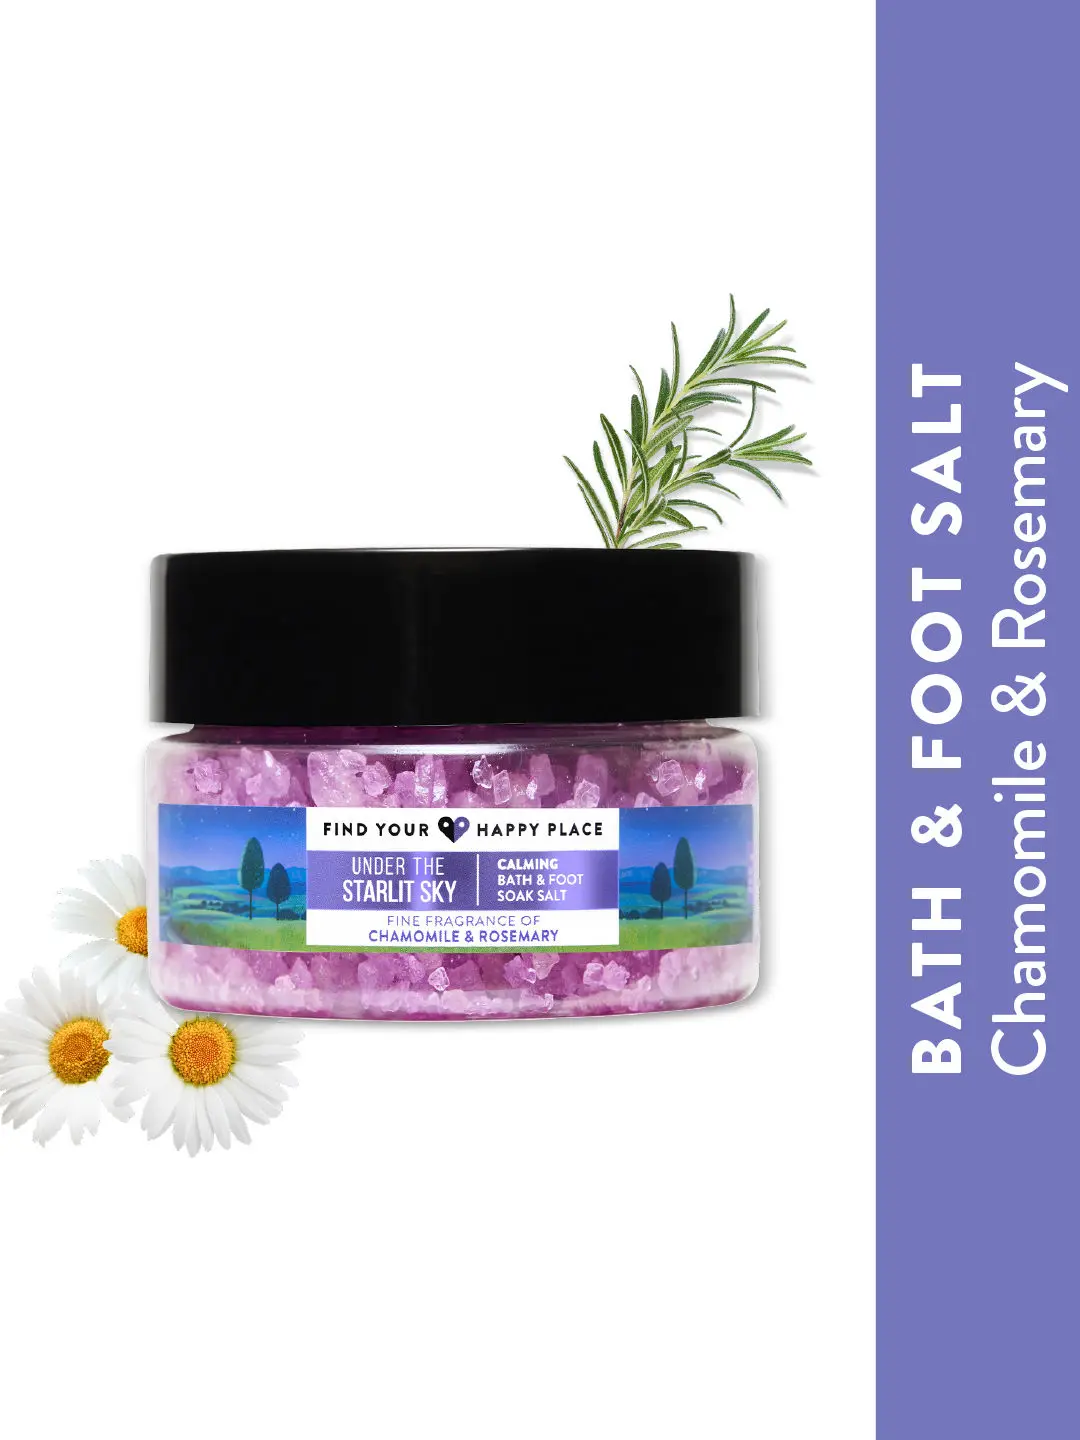 Find Your Happy Place - Under The Starlit Sky Bath & Foot Soak Salt Chamomile & Rosemary 250g